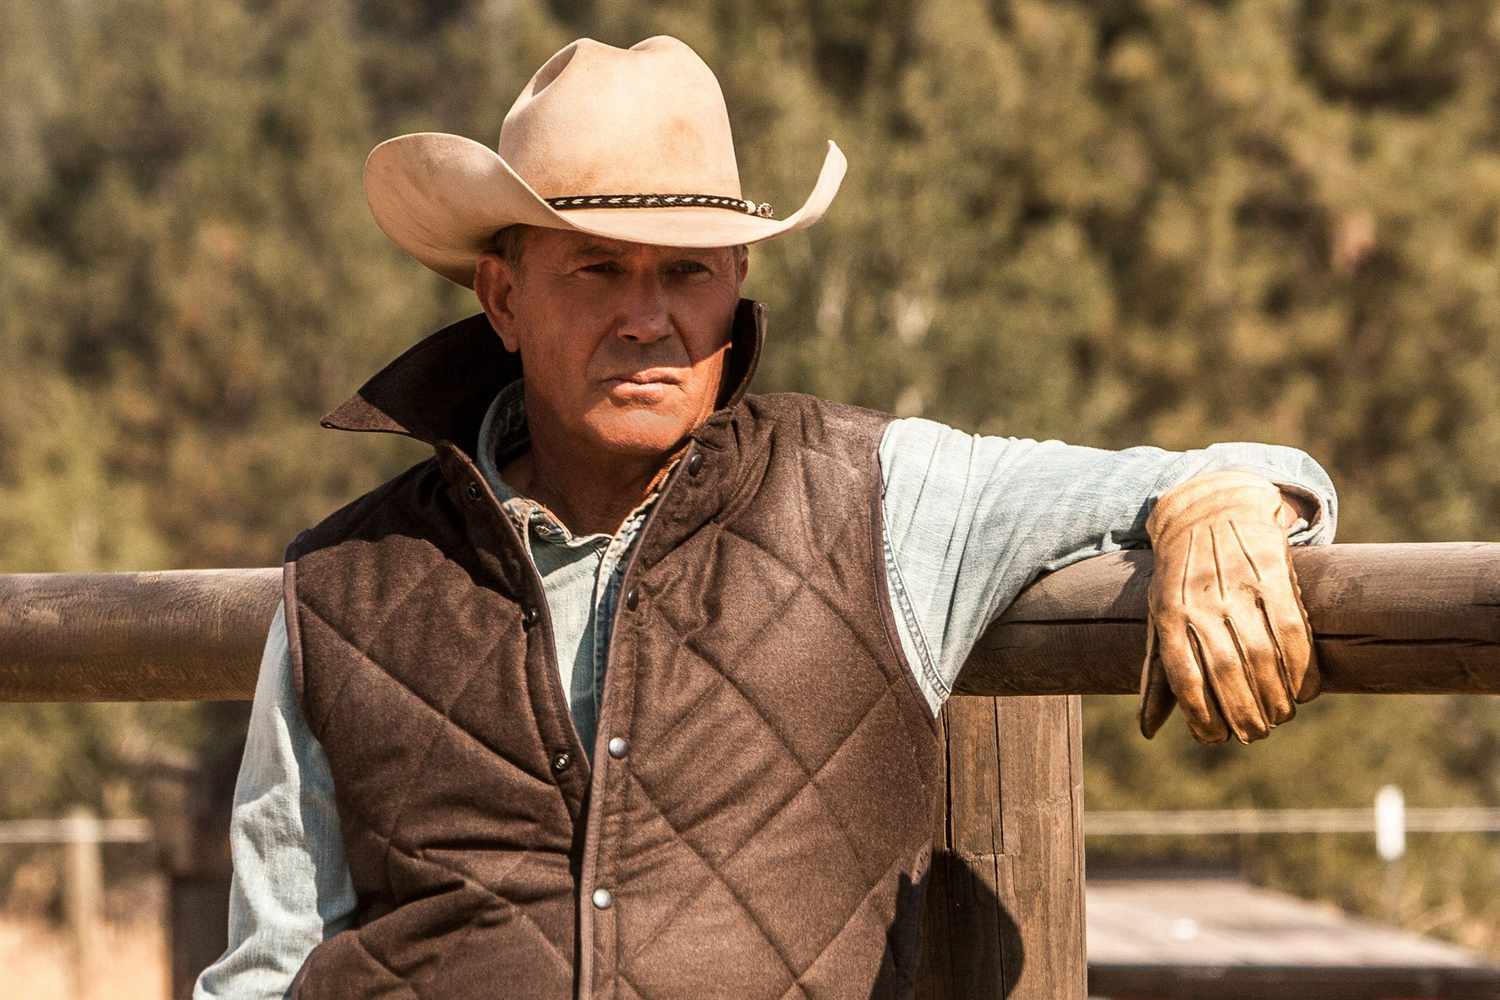 Kevin Costner's Exit from Yellowstone: A Legal Battle Looms